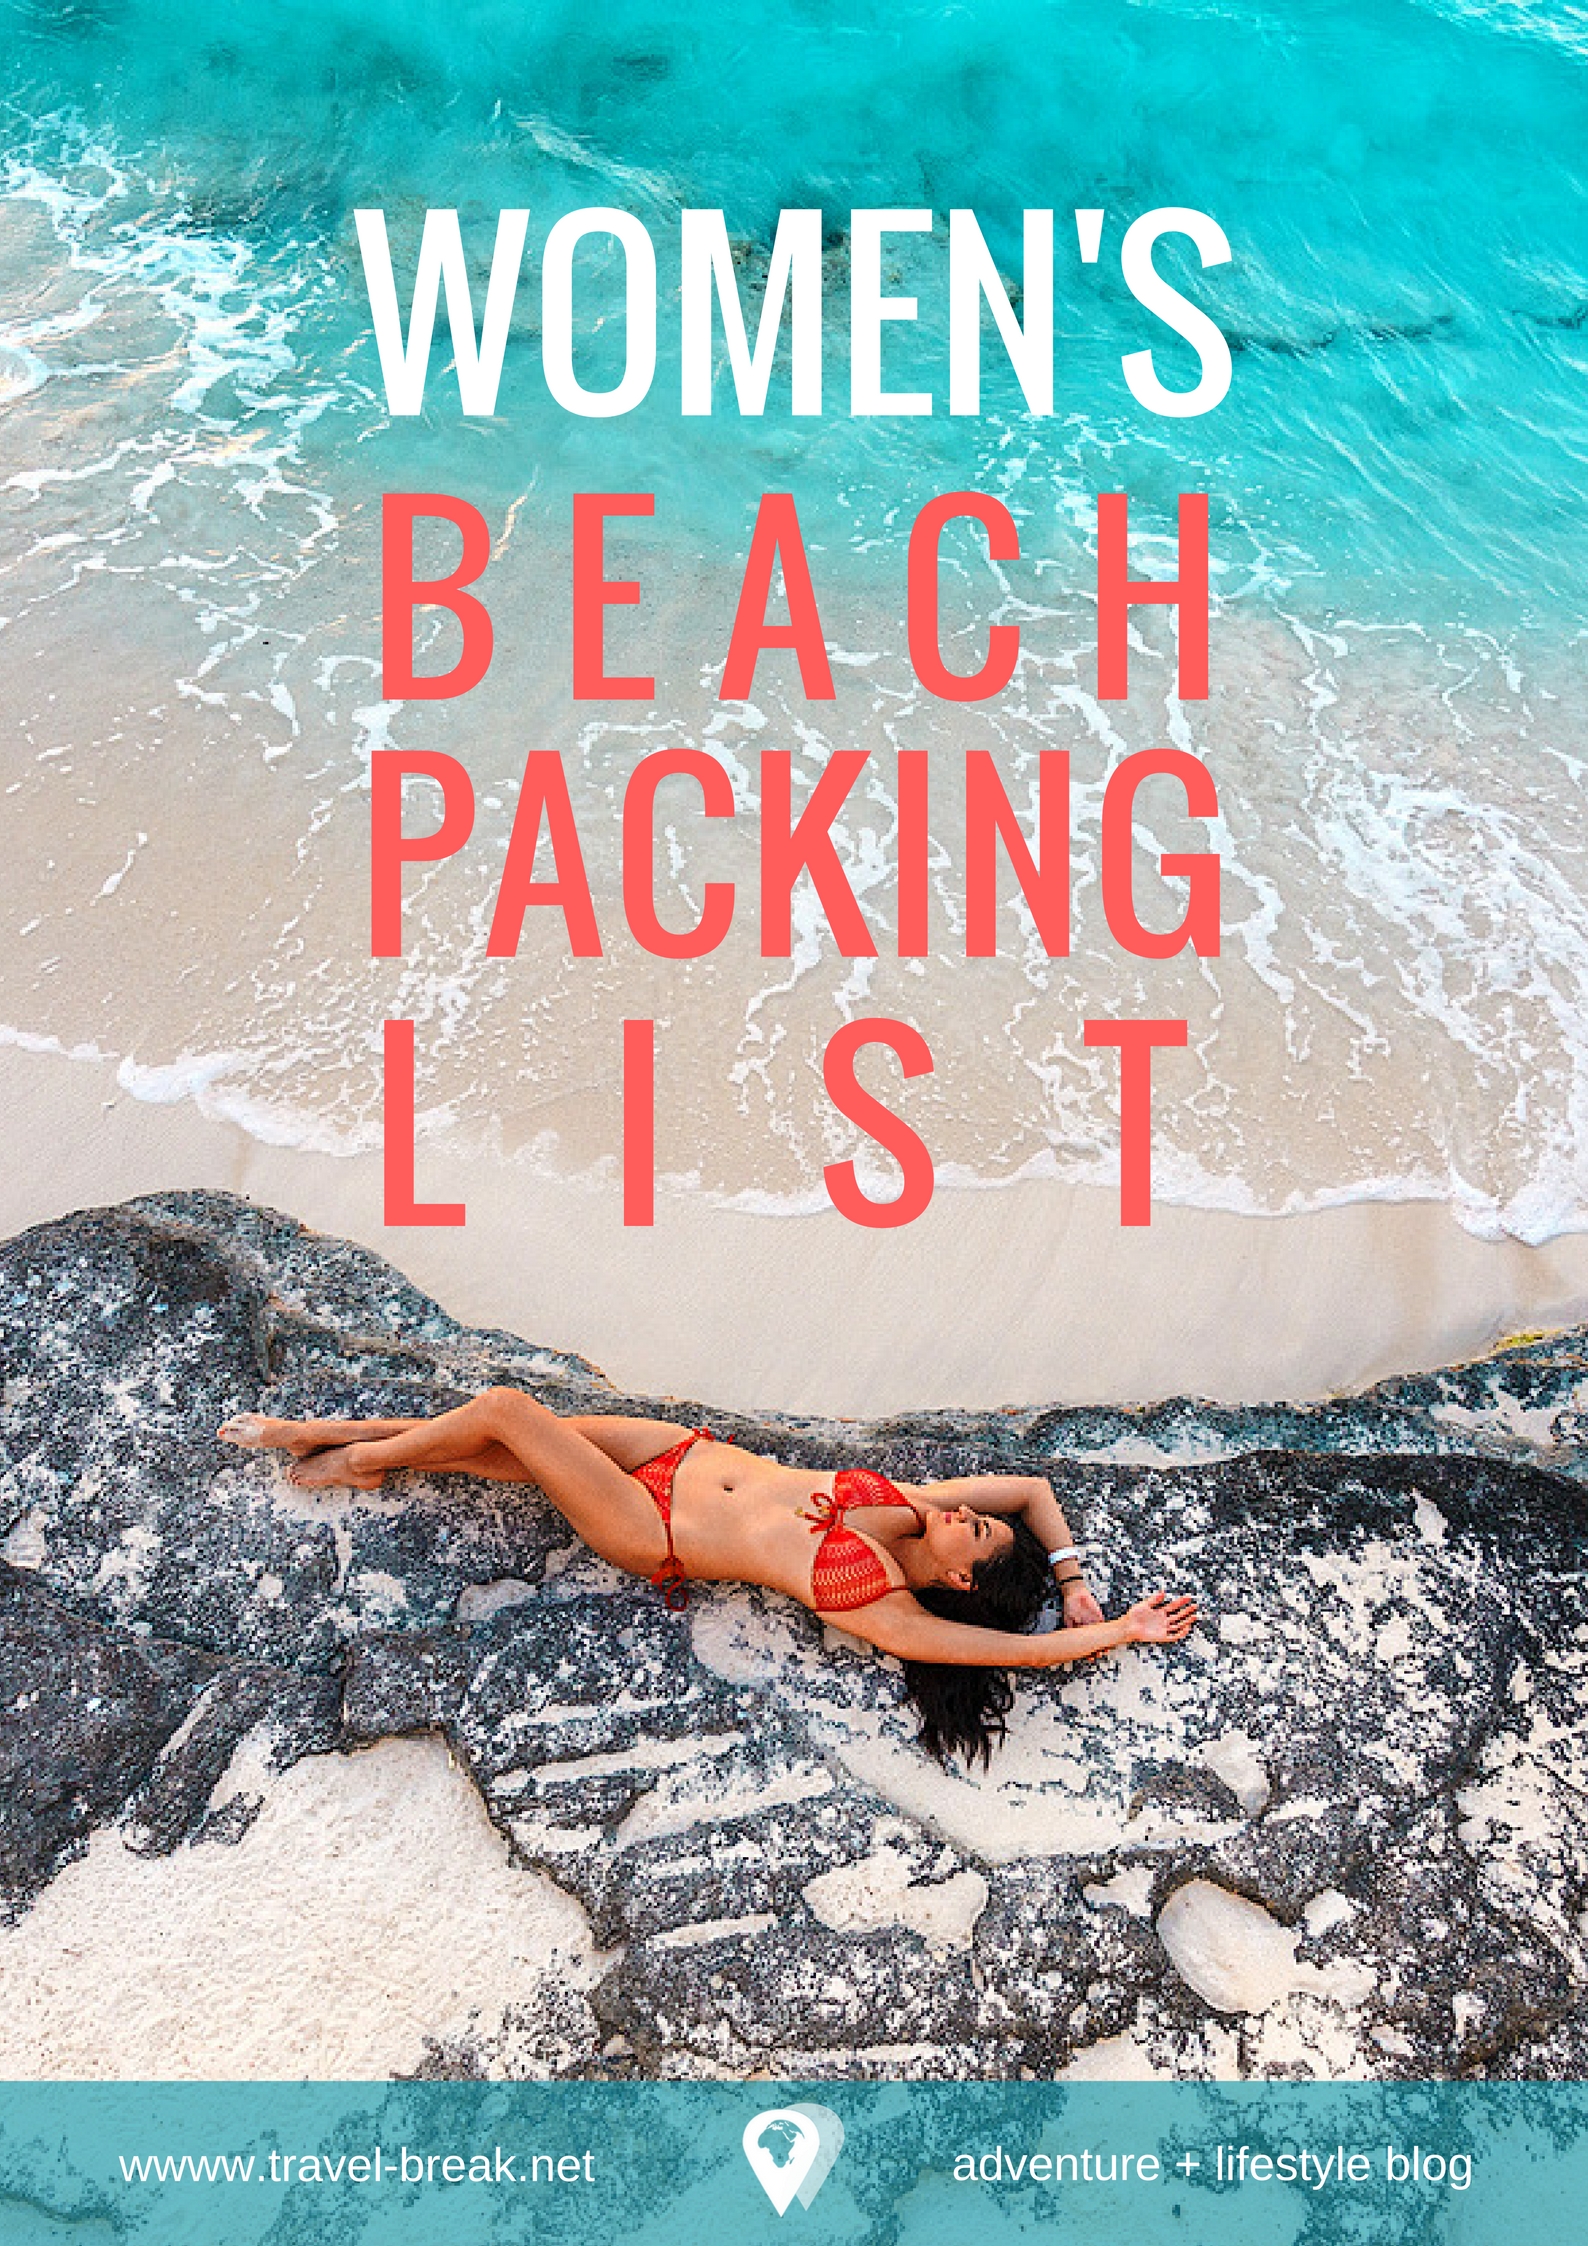 Women's Beach Packing List | The perfect checklist for your next vacation, swimsuit styles in black, white + color. Also, my favorite tropical destinations and beach parties. From the travel blog TravelBreak.net